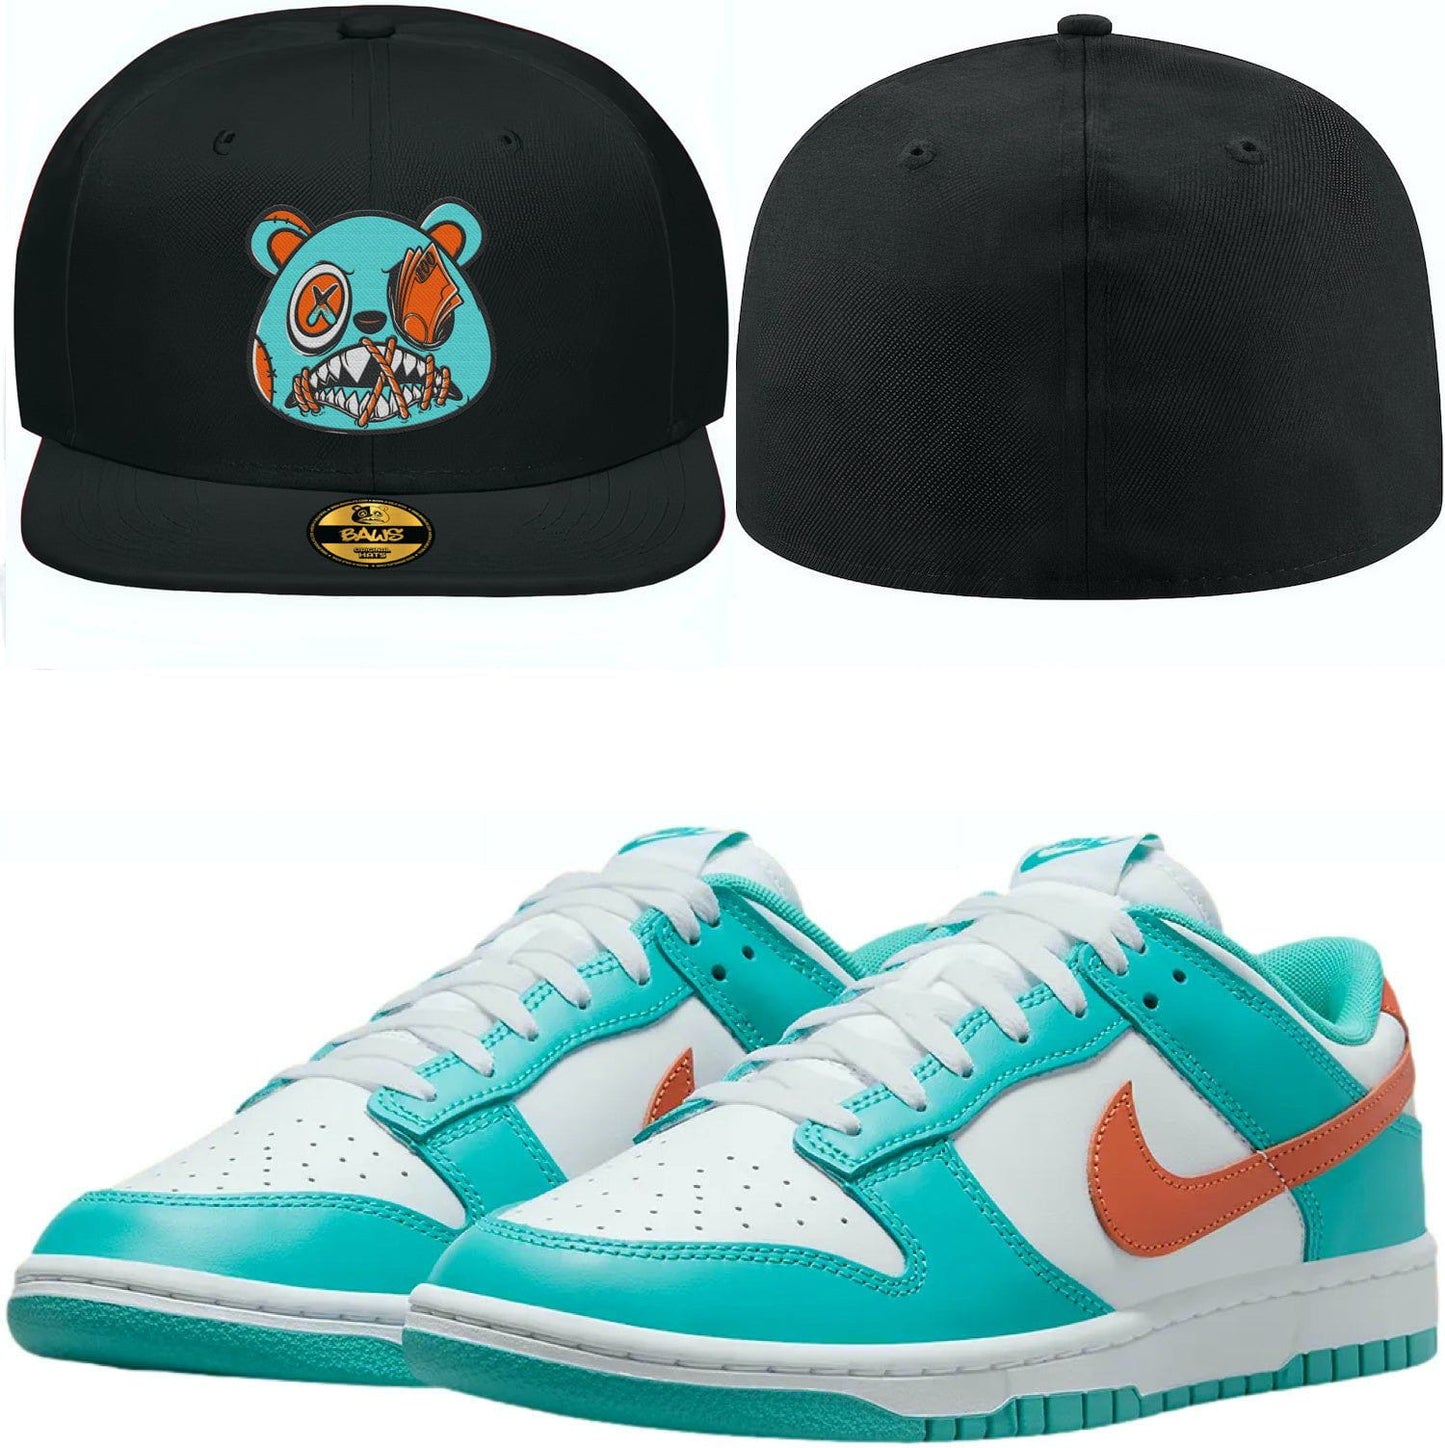 Miami Dolphin Dunks Fitted Hats - Miami Money Talks Baws